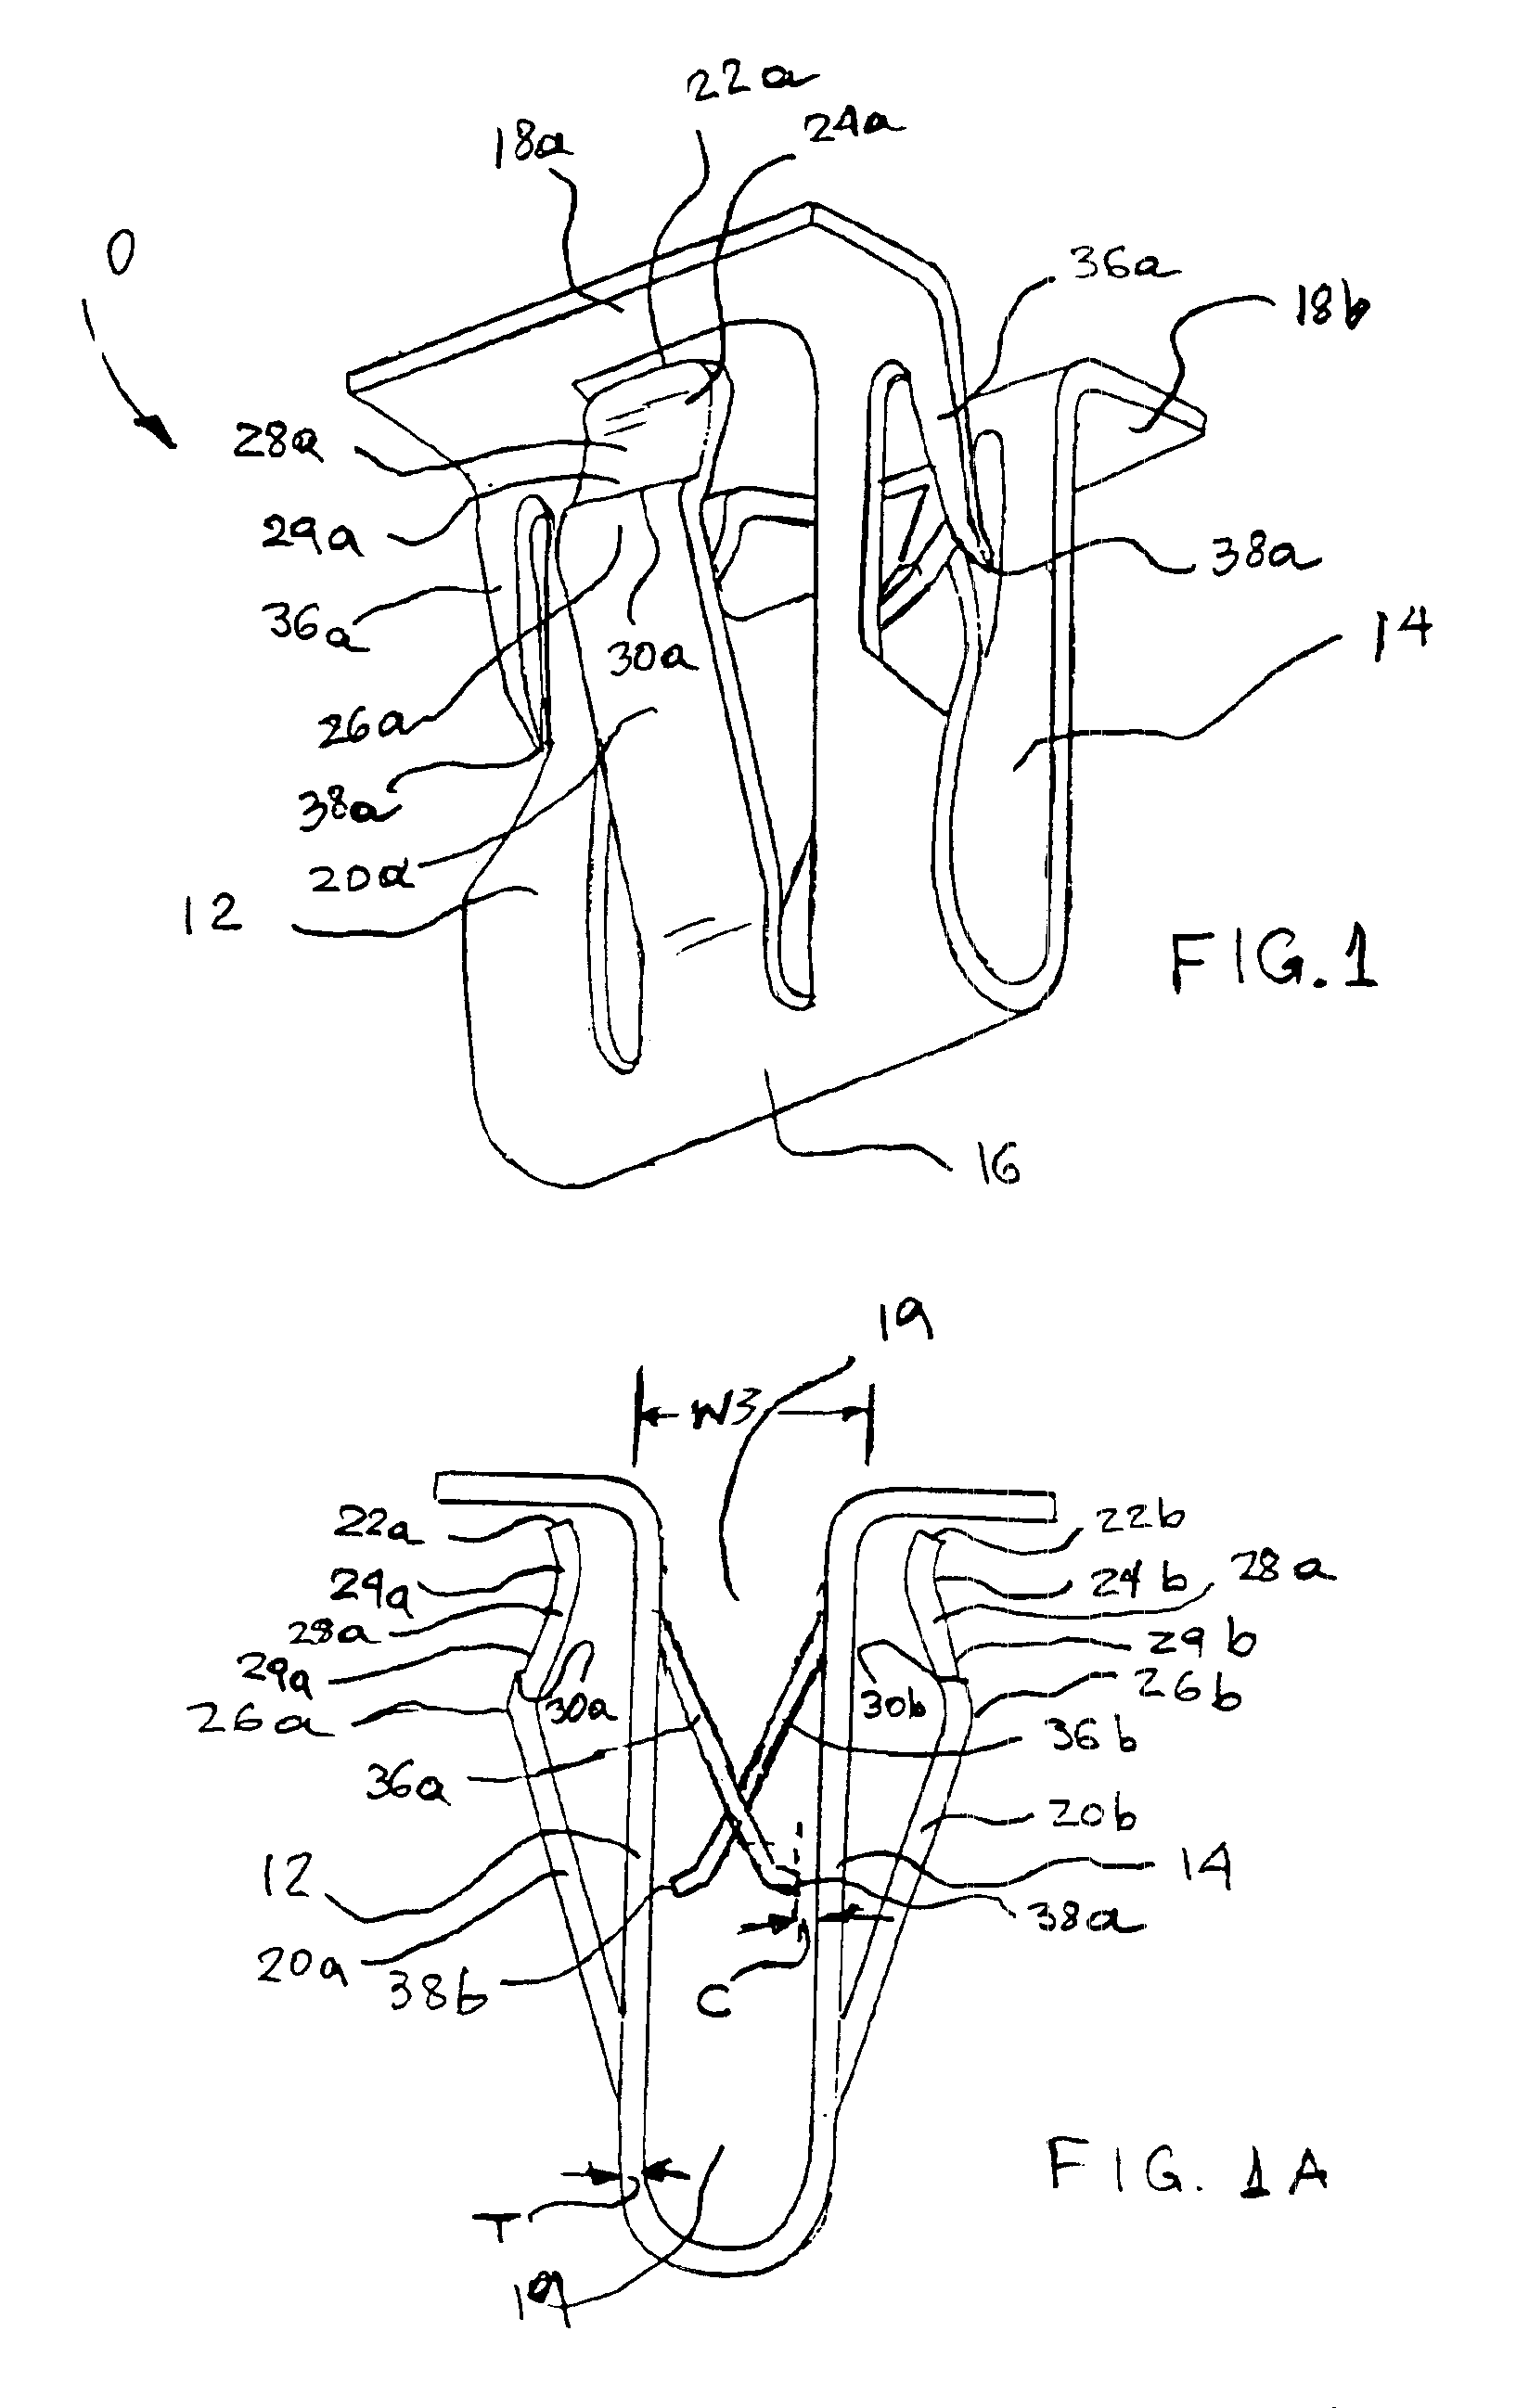 Assemblies comprising fastener with ergonomically balanced removal to insertion ratio